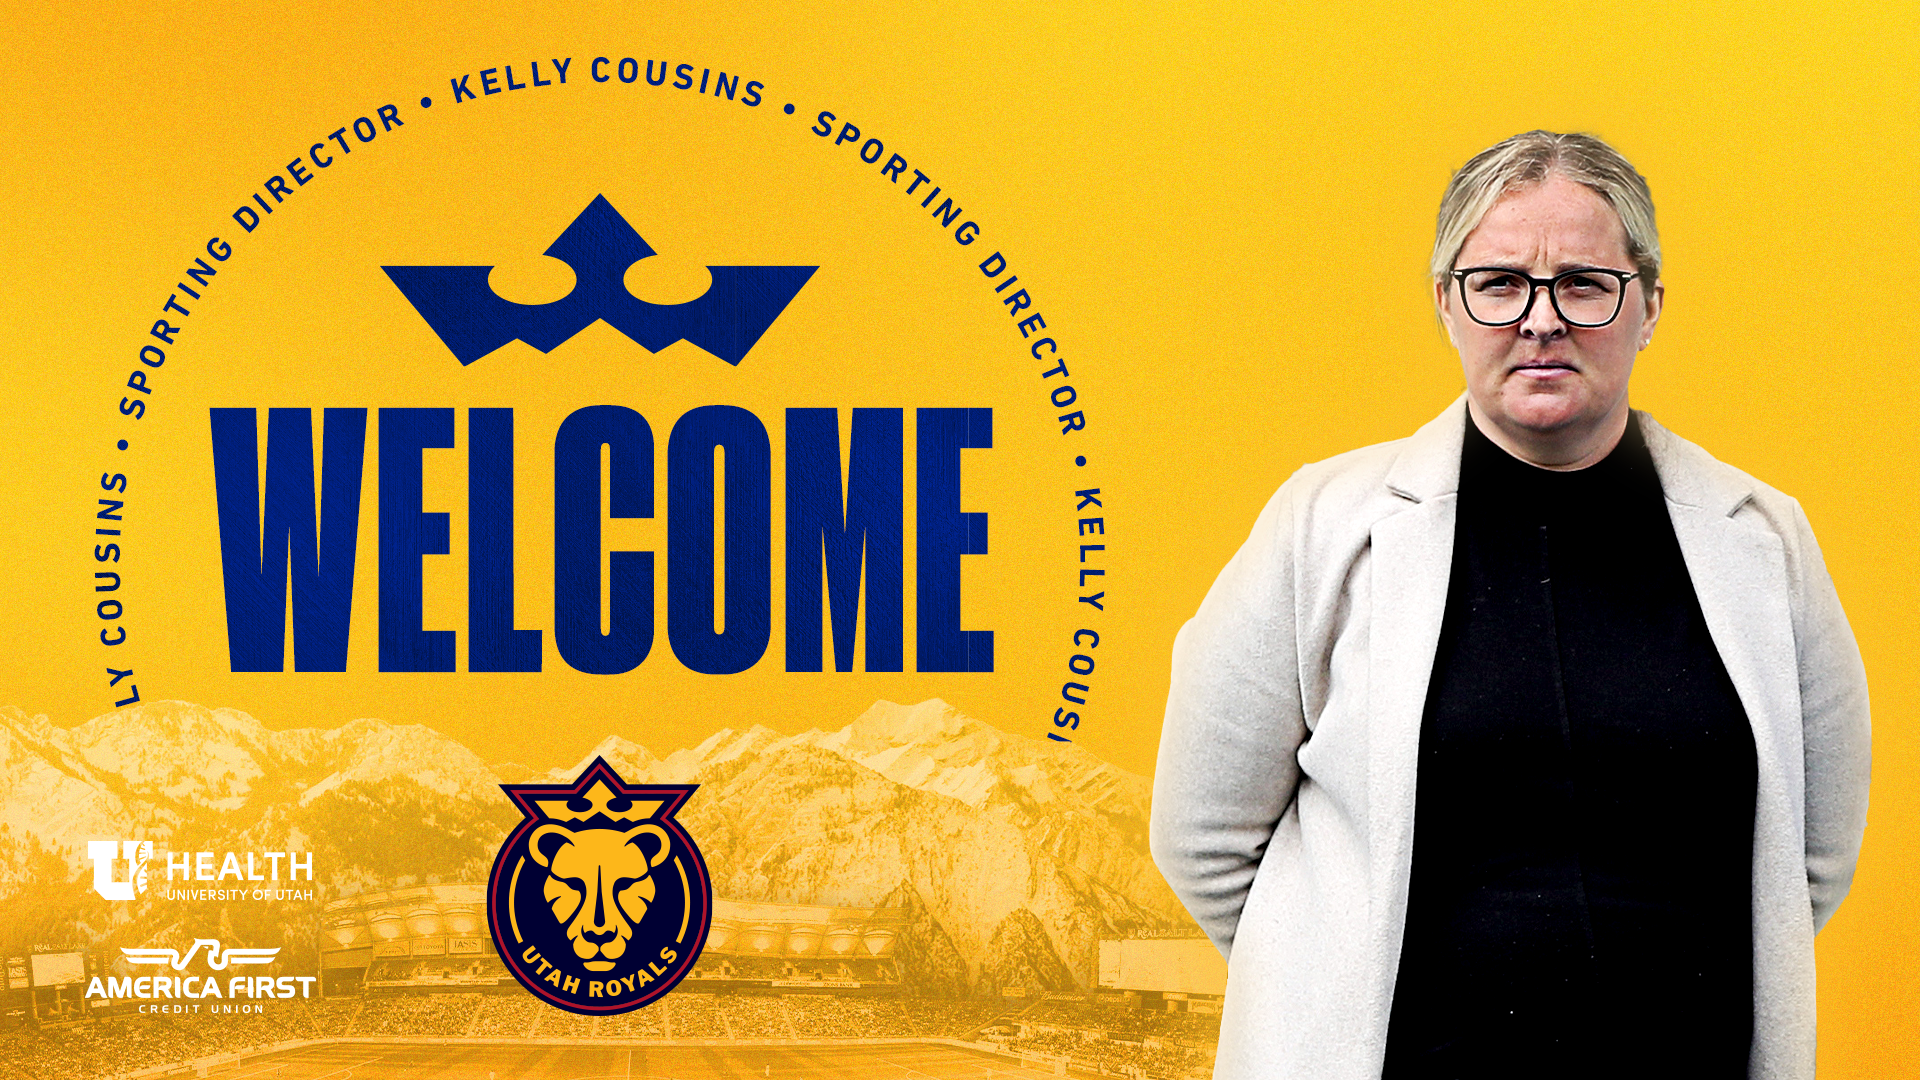 Utah Royals name former player Amy Rodriguez as head coach